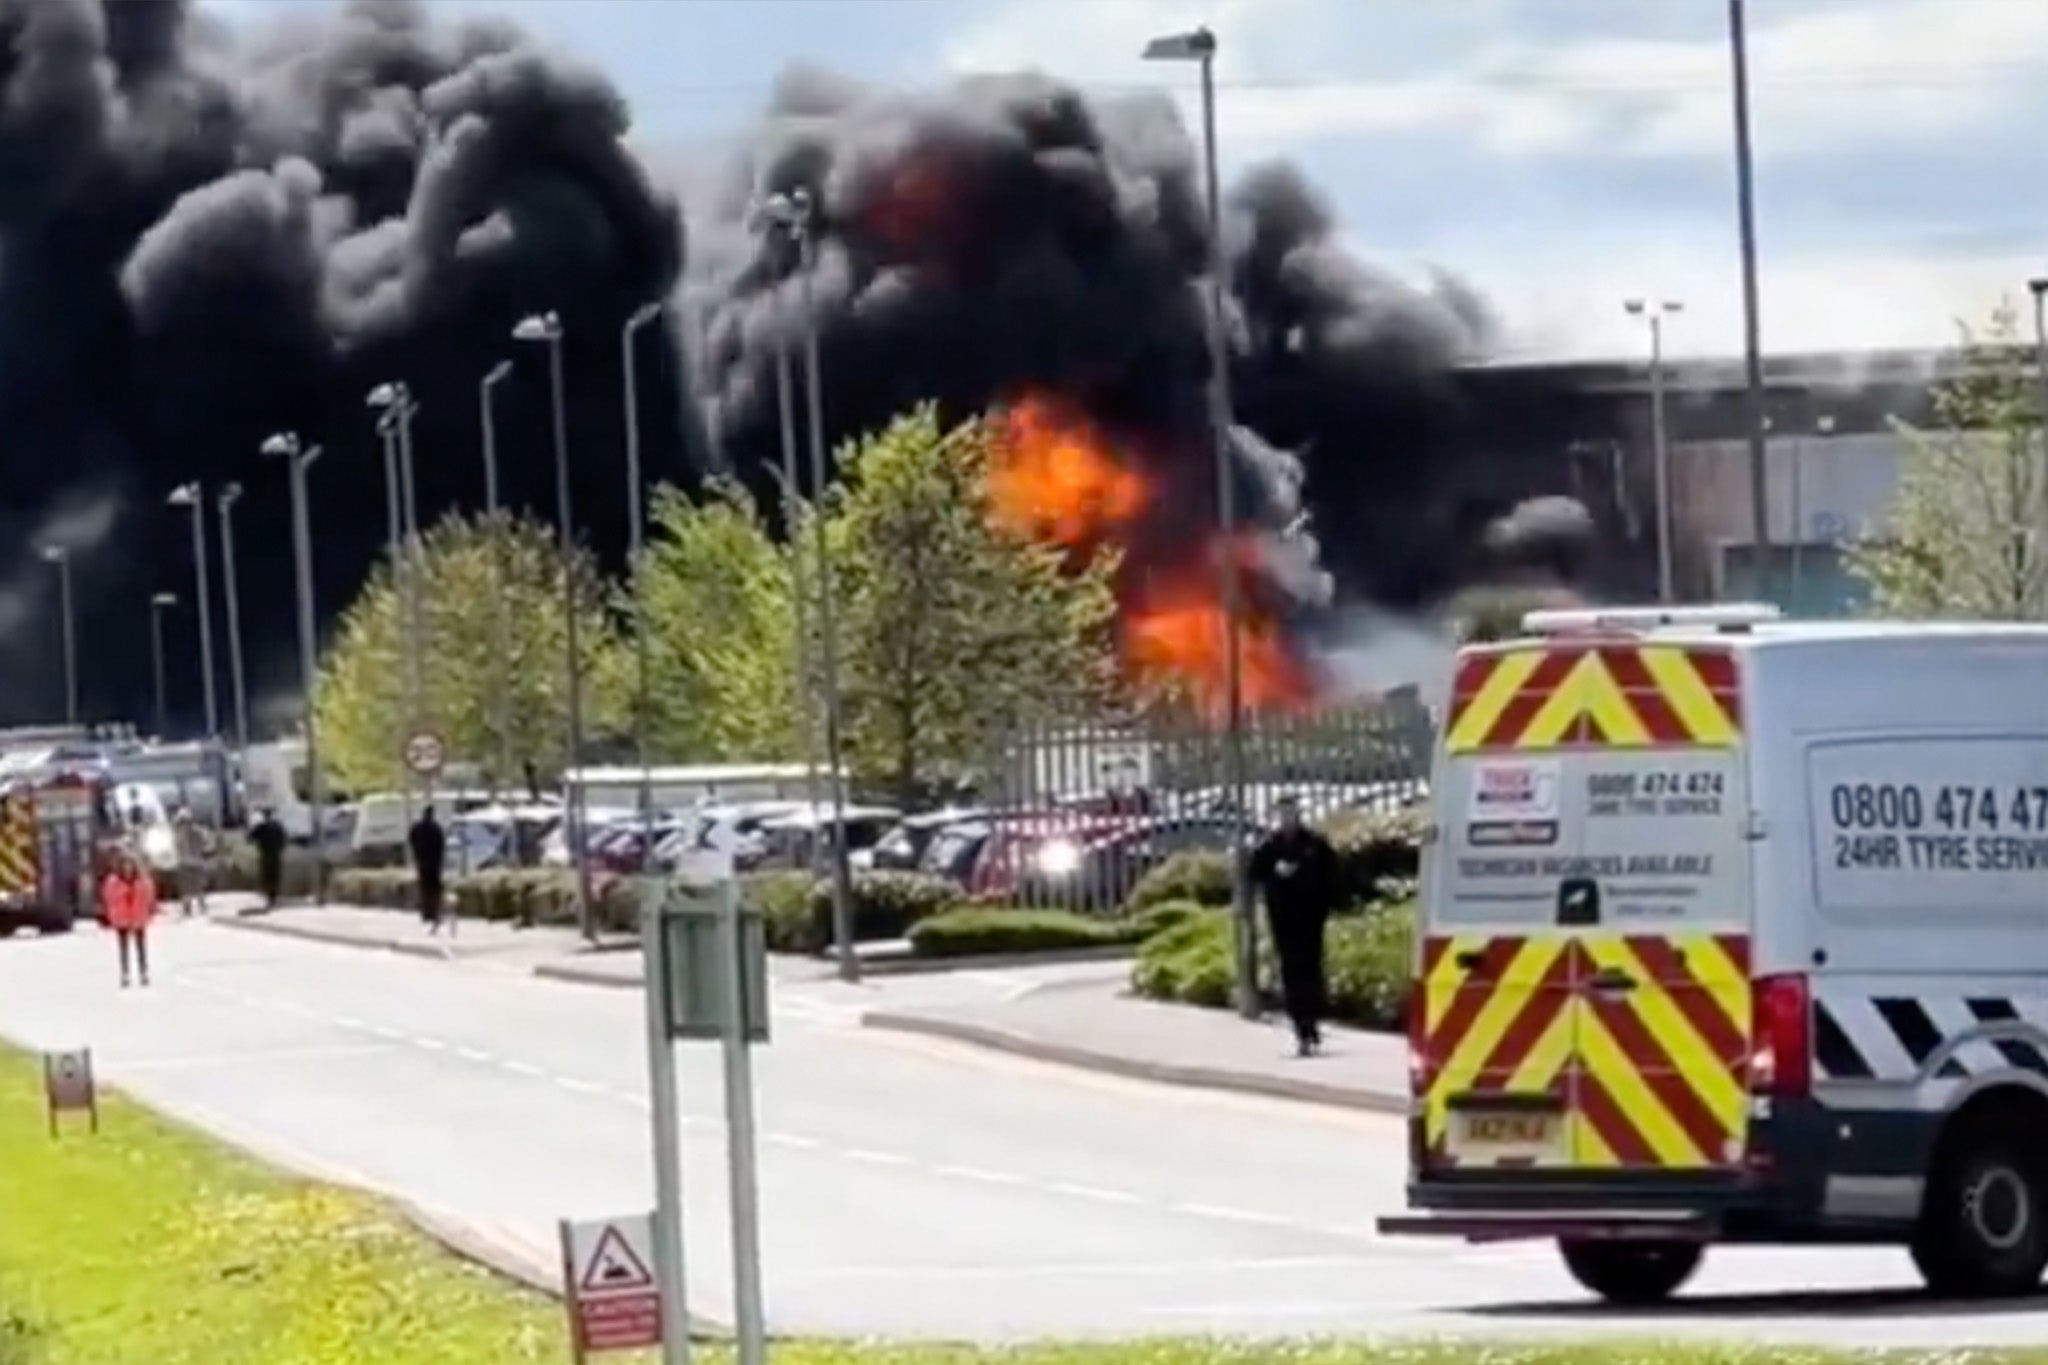 huge fire rips through evri depot in avonmouth as smoke seen for miles